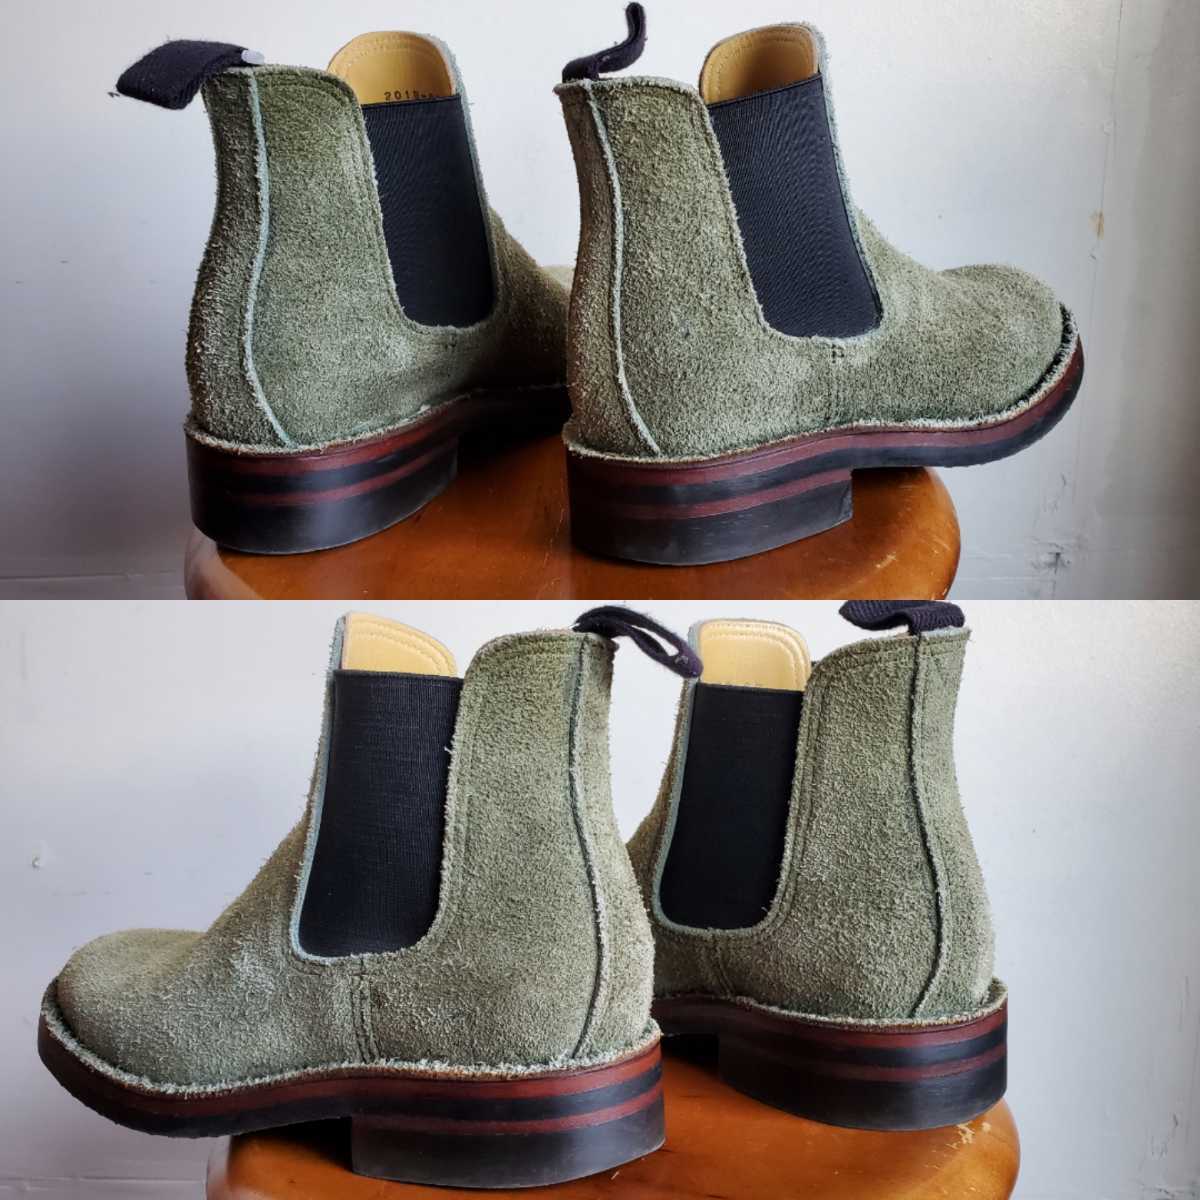 ze rose ZERROWS Boneakers Line suede side-gore boots size 6E/24. rank green group green khaki used USED